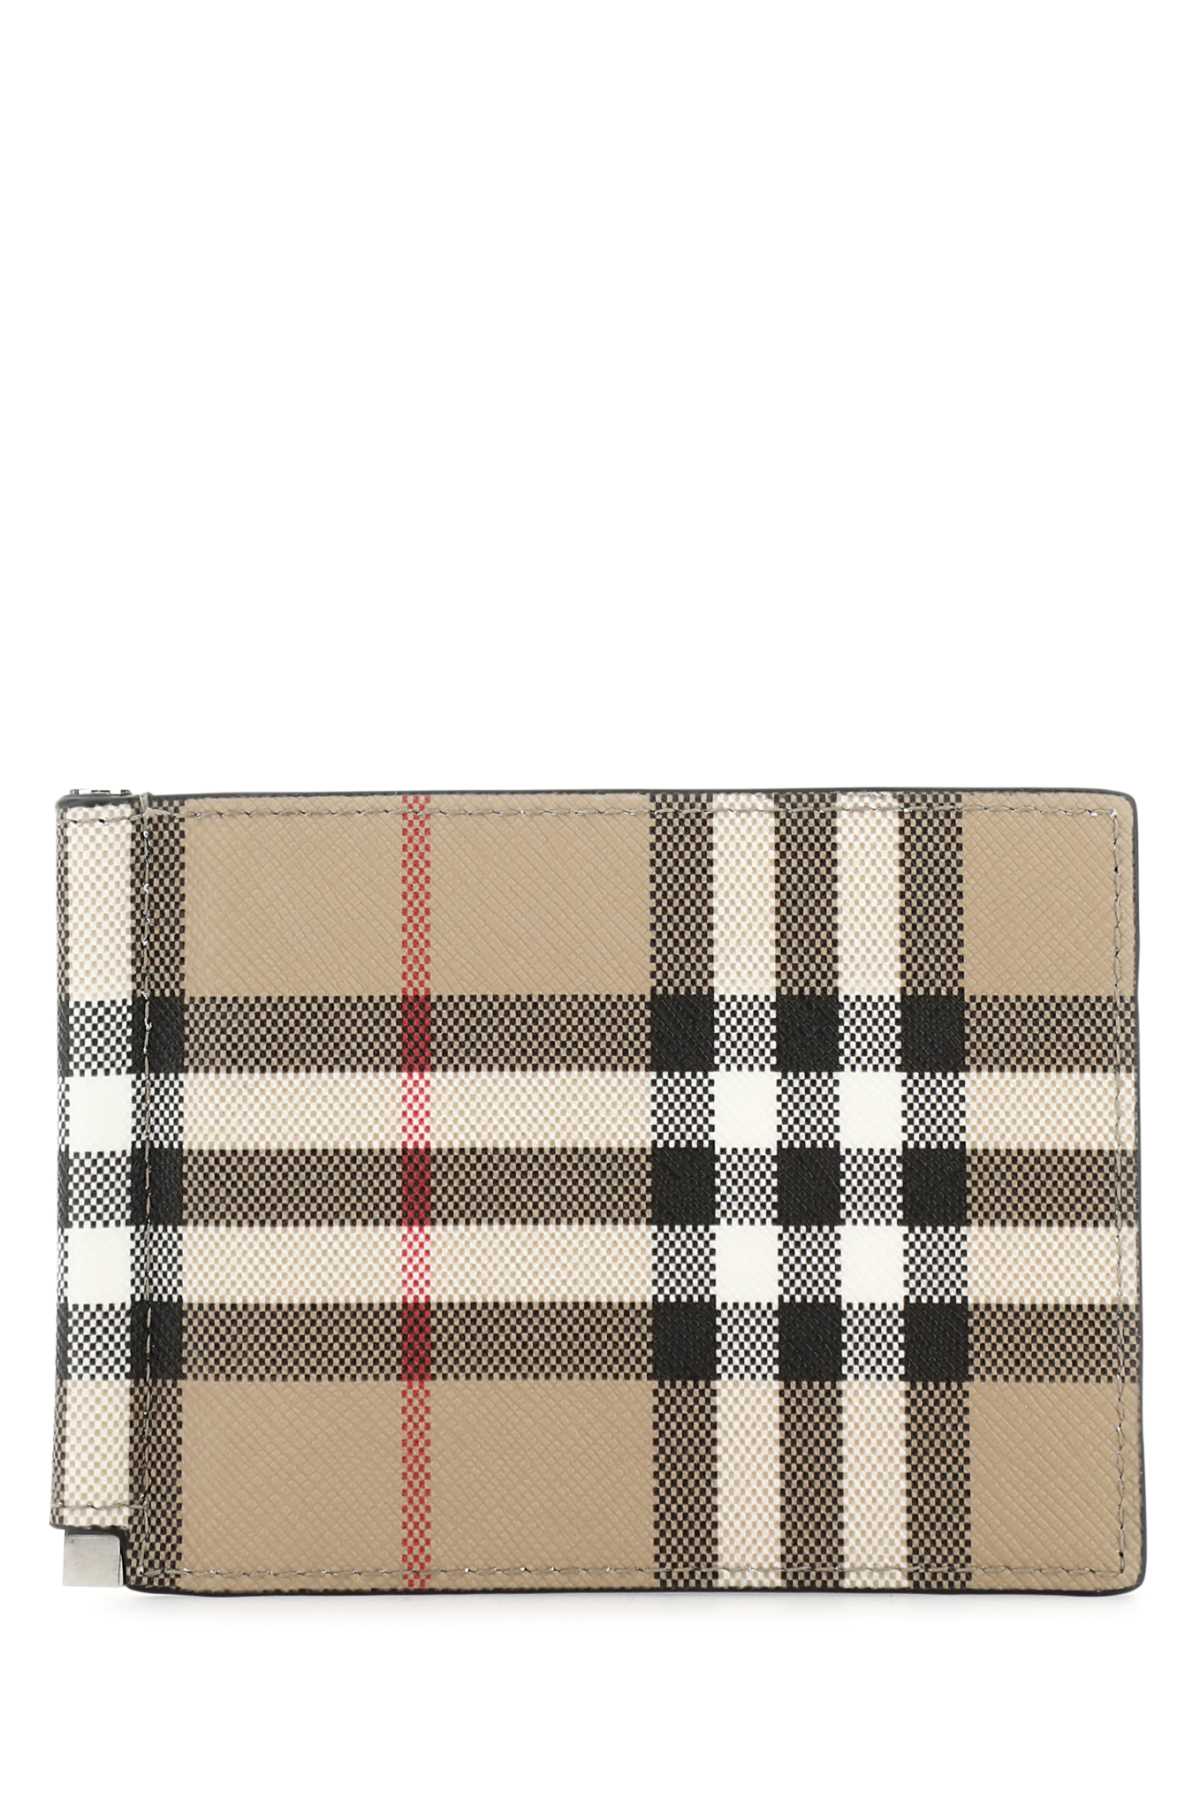 Shop Burberry Printed E-canvas Wallet In A7026